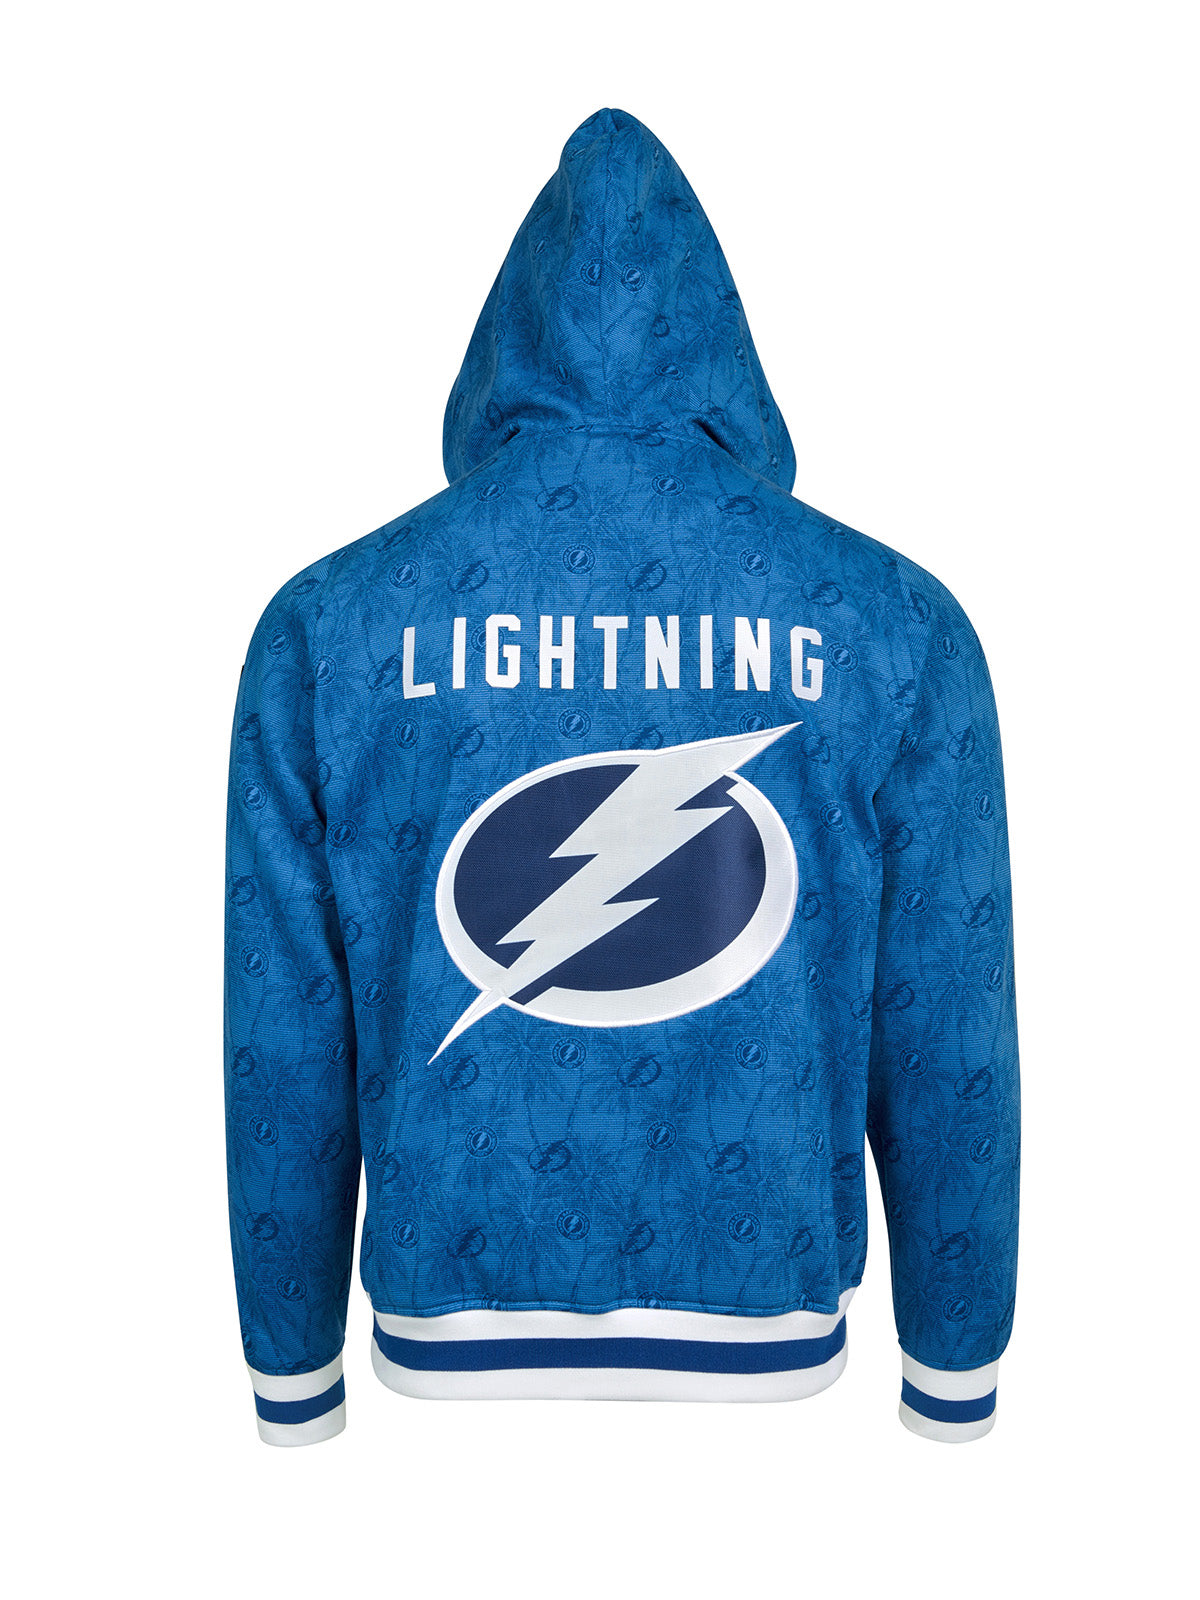 Tampa Bay Lightning Hoodie - Show your team spirit, with the iconic team logo patch centered on the back, and proudly display your Tampa Bay Lightning support in their team colors with this NHL hockey hoodie.